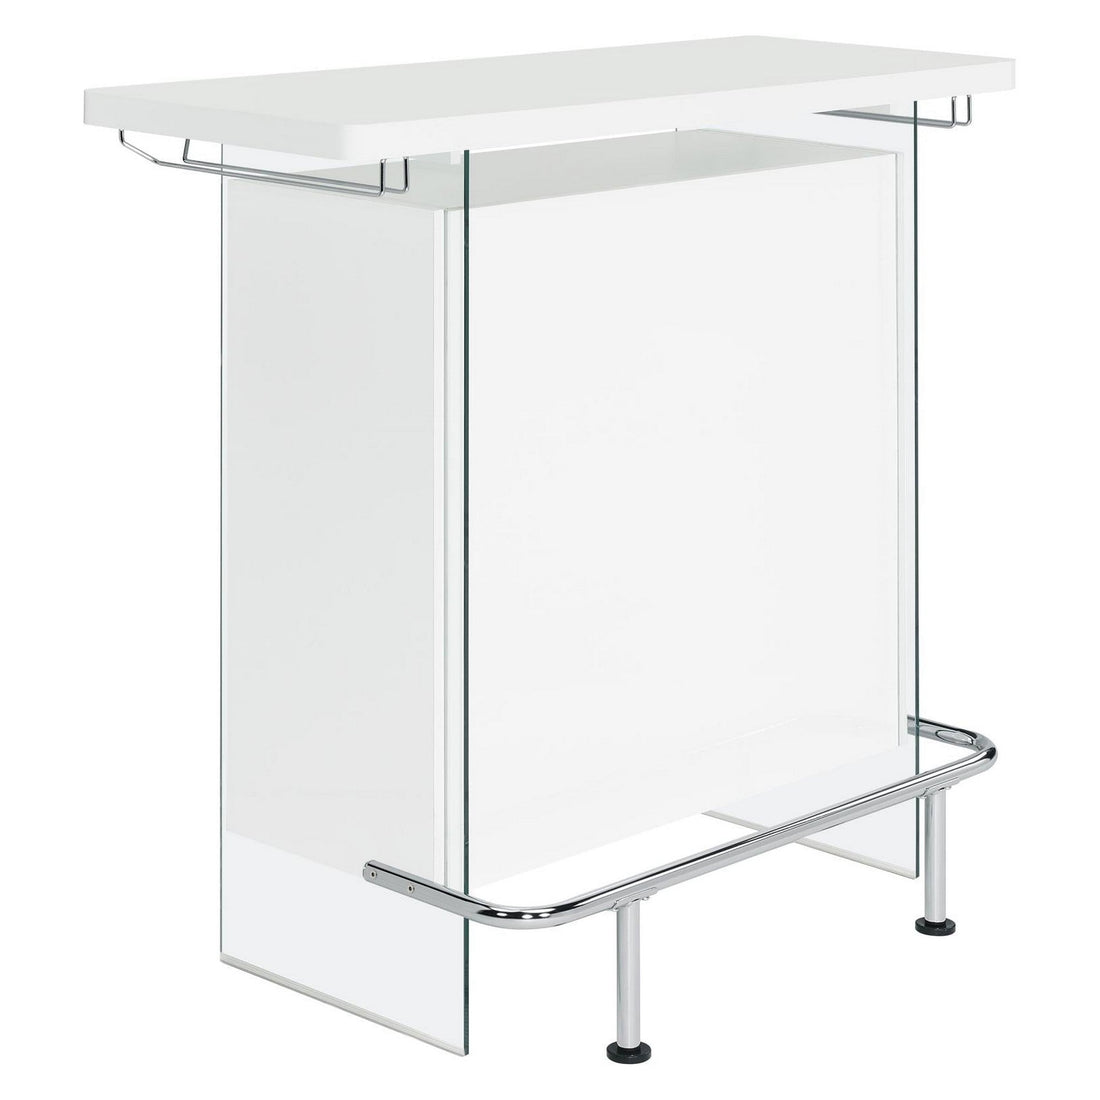 Acosta Rectangular Bar Unit with Footrest and Glass Side Panels 182632